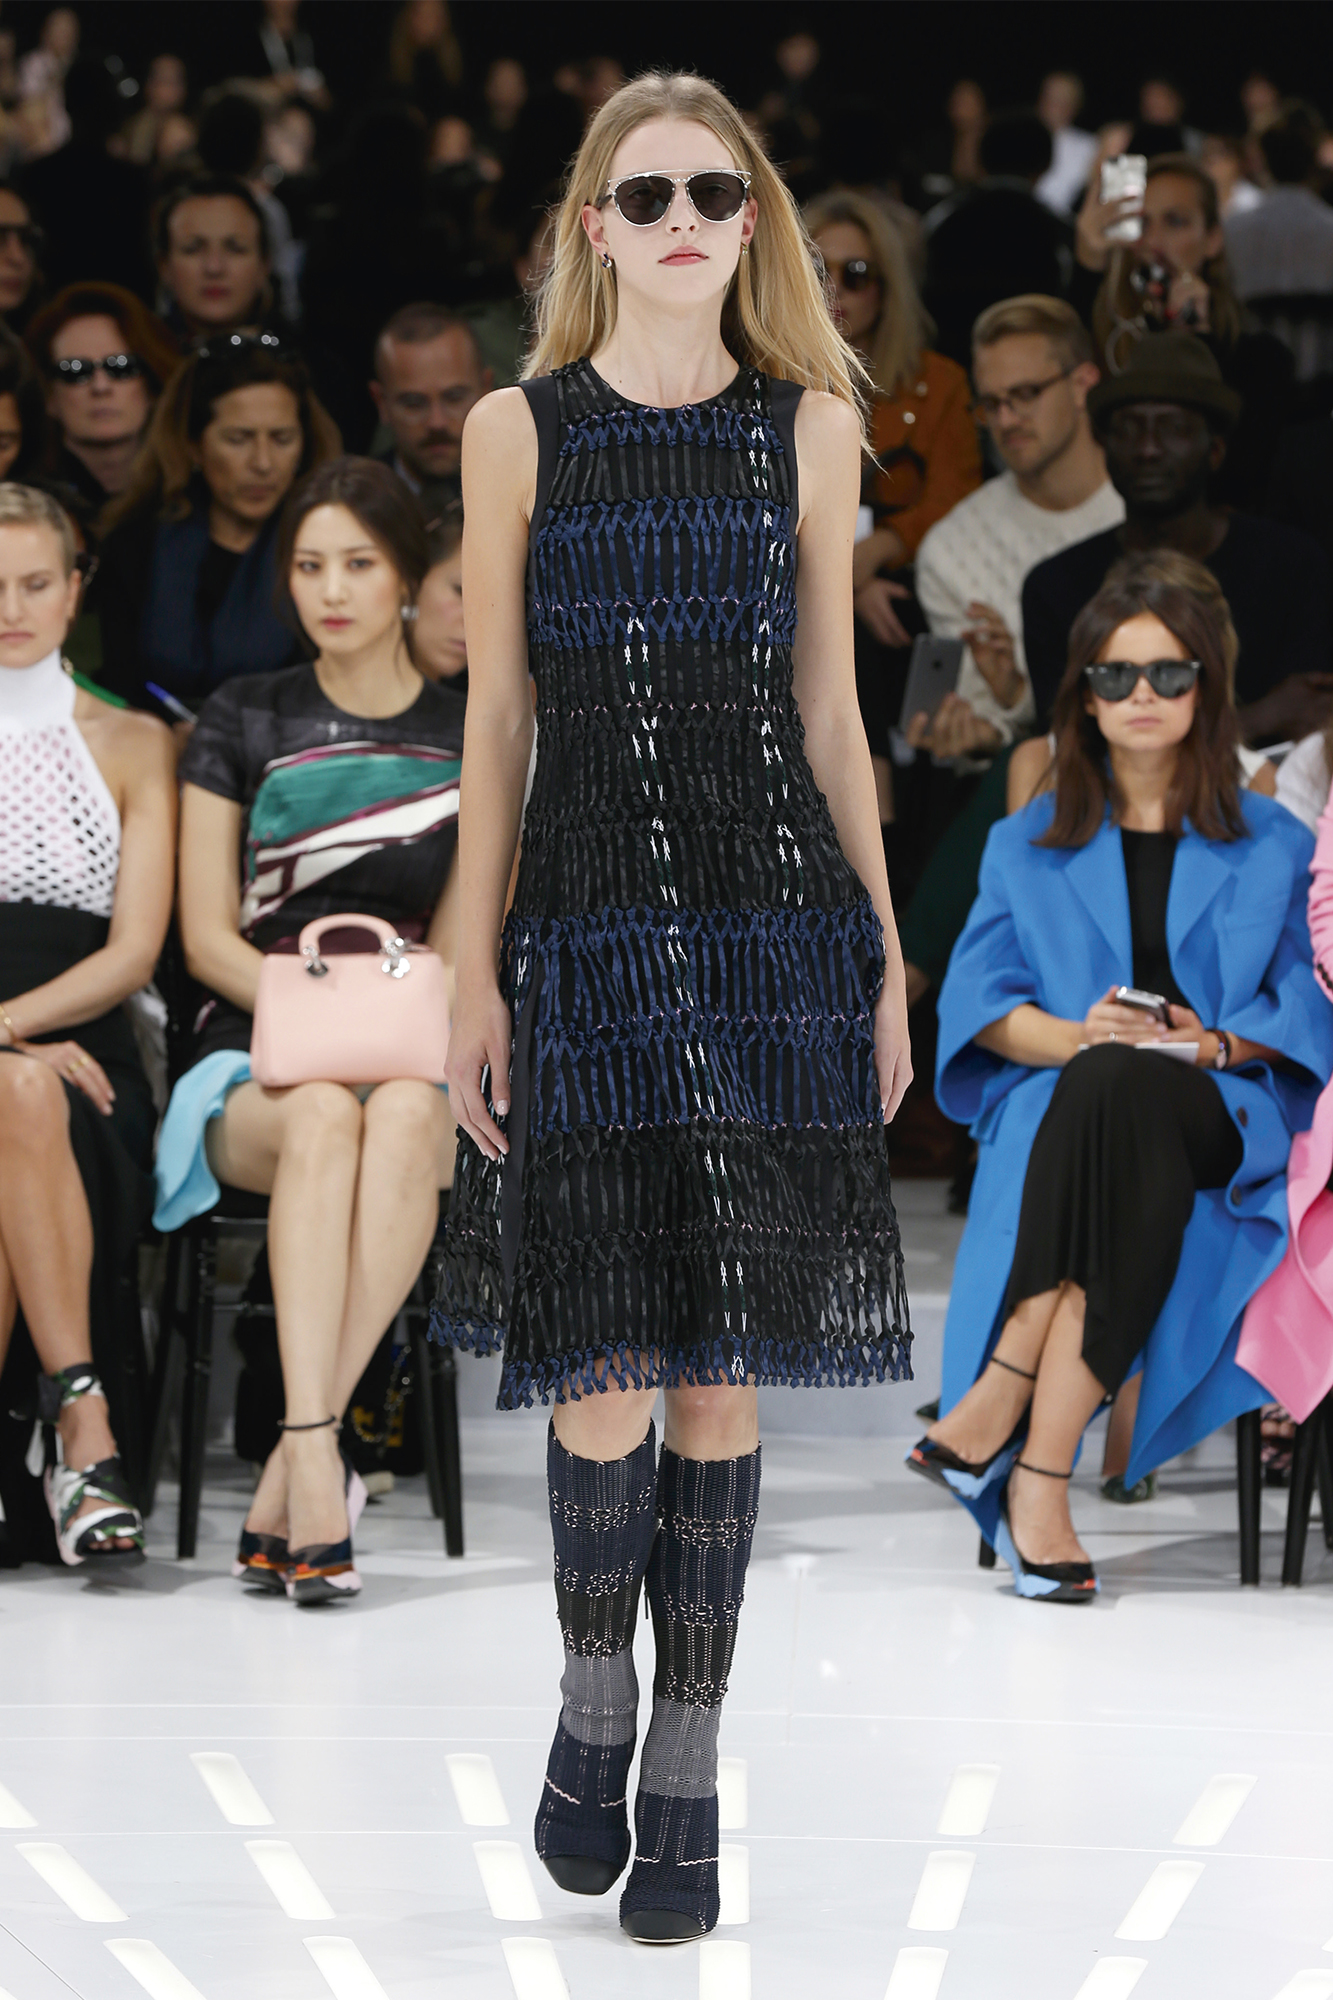 Christian Dior Haute Couture Spring-Summer Ready To Wear Dresses & Accessories Collection 2015-16 (35)